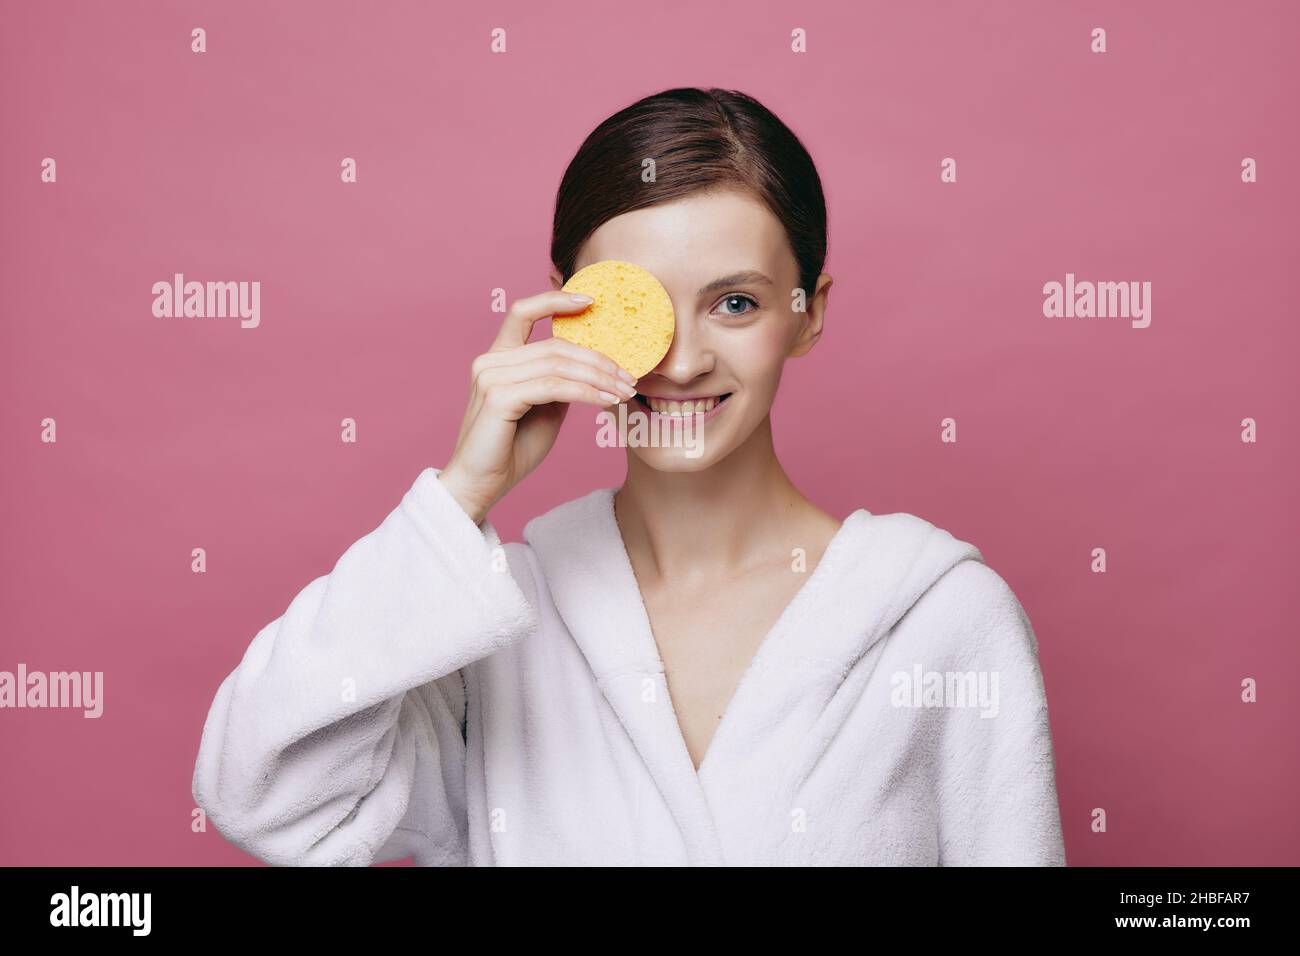 Young beautiful smiling girl holds cleansing sponge Stock Photo